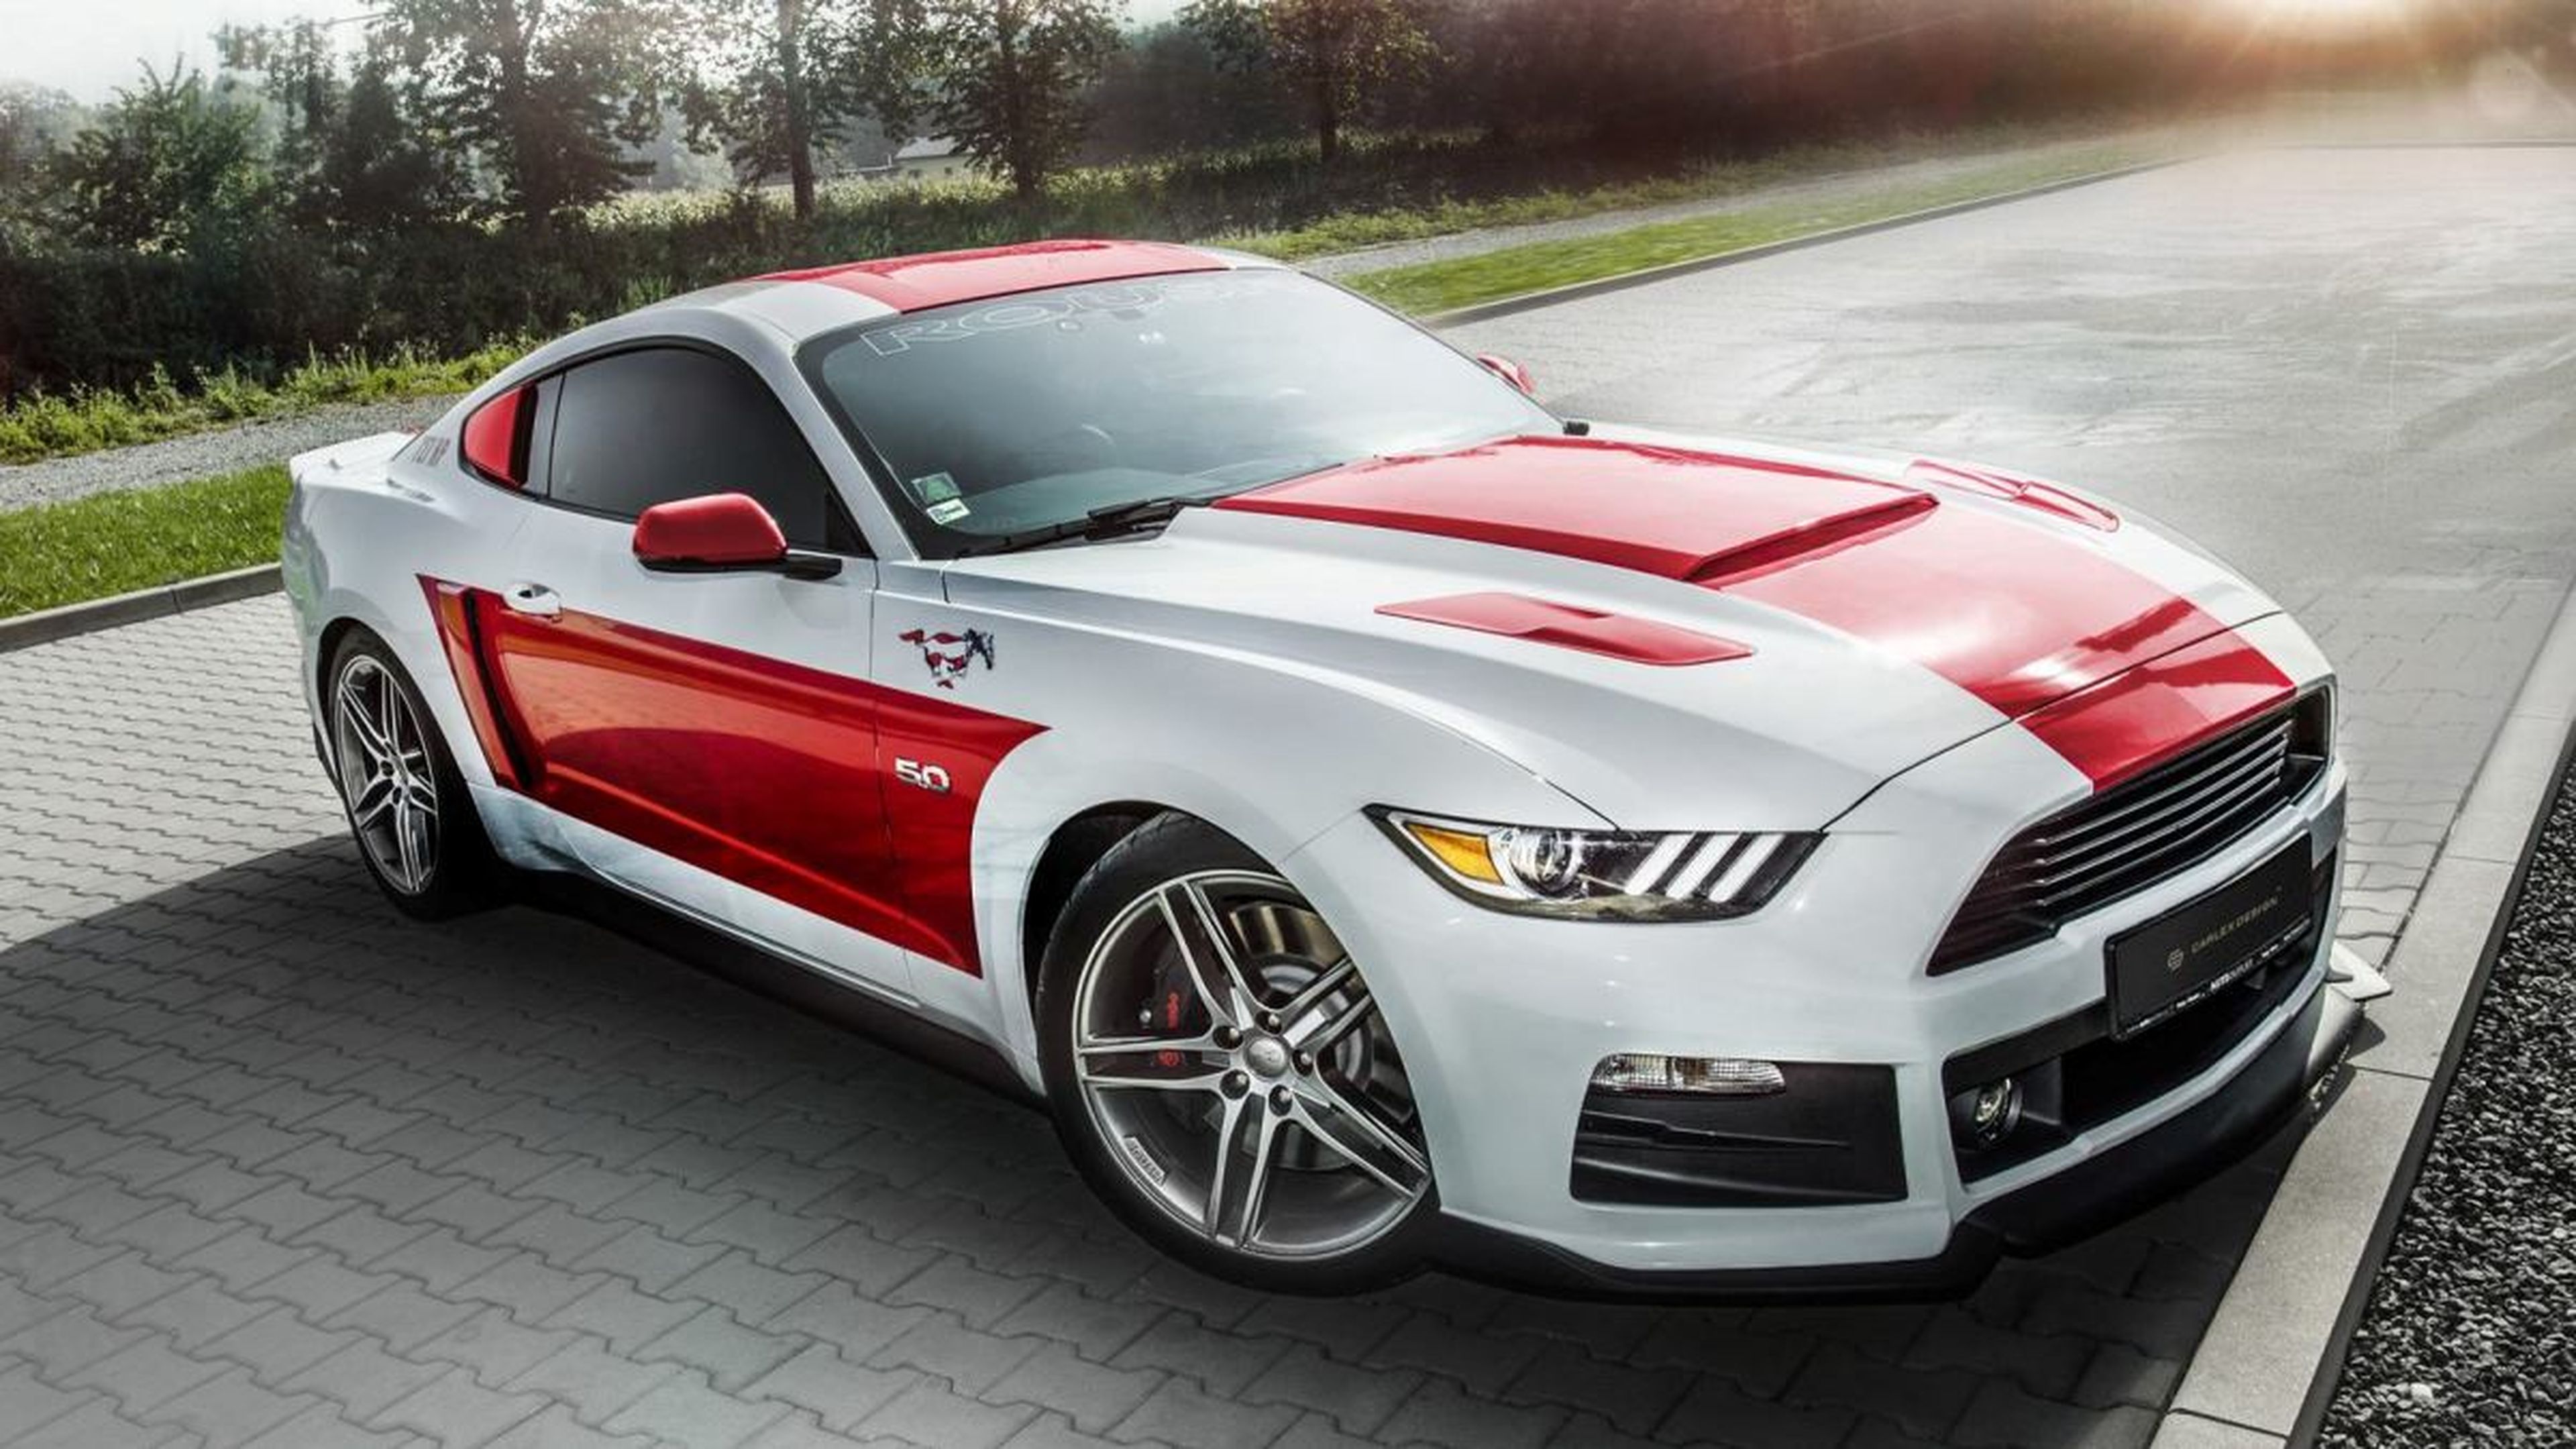 Ford Mustang by Carlex Design